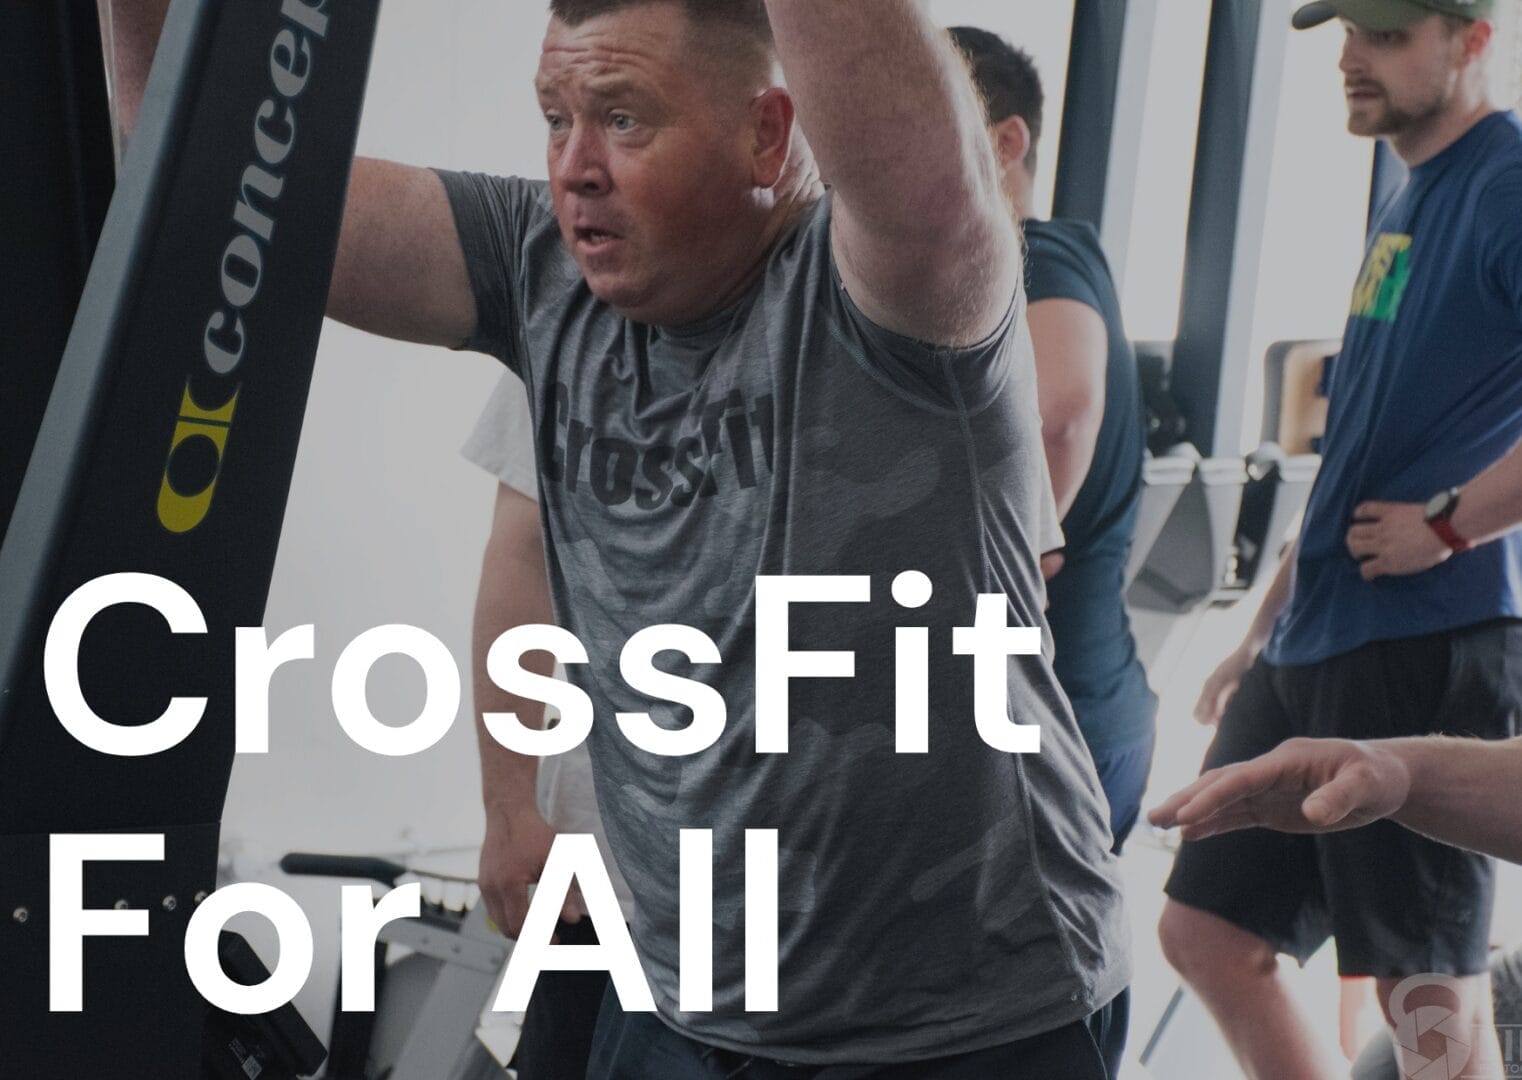 Man competing in CrossFit Open